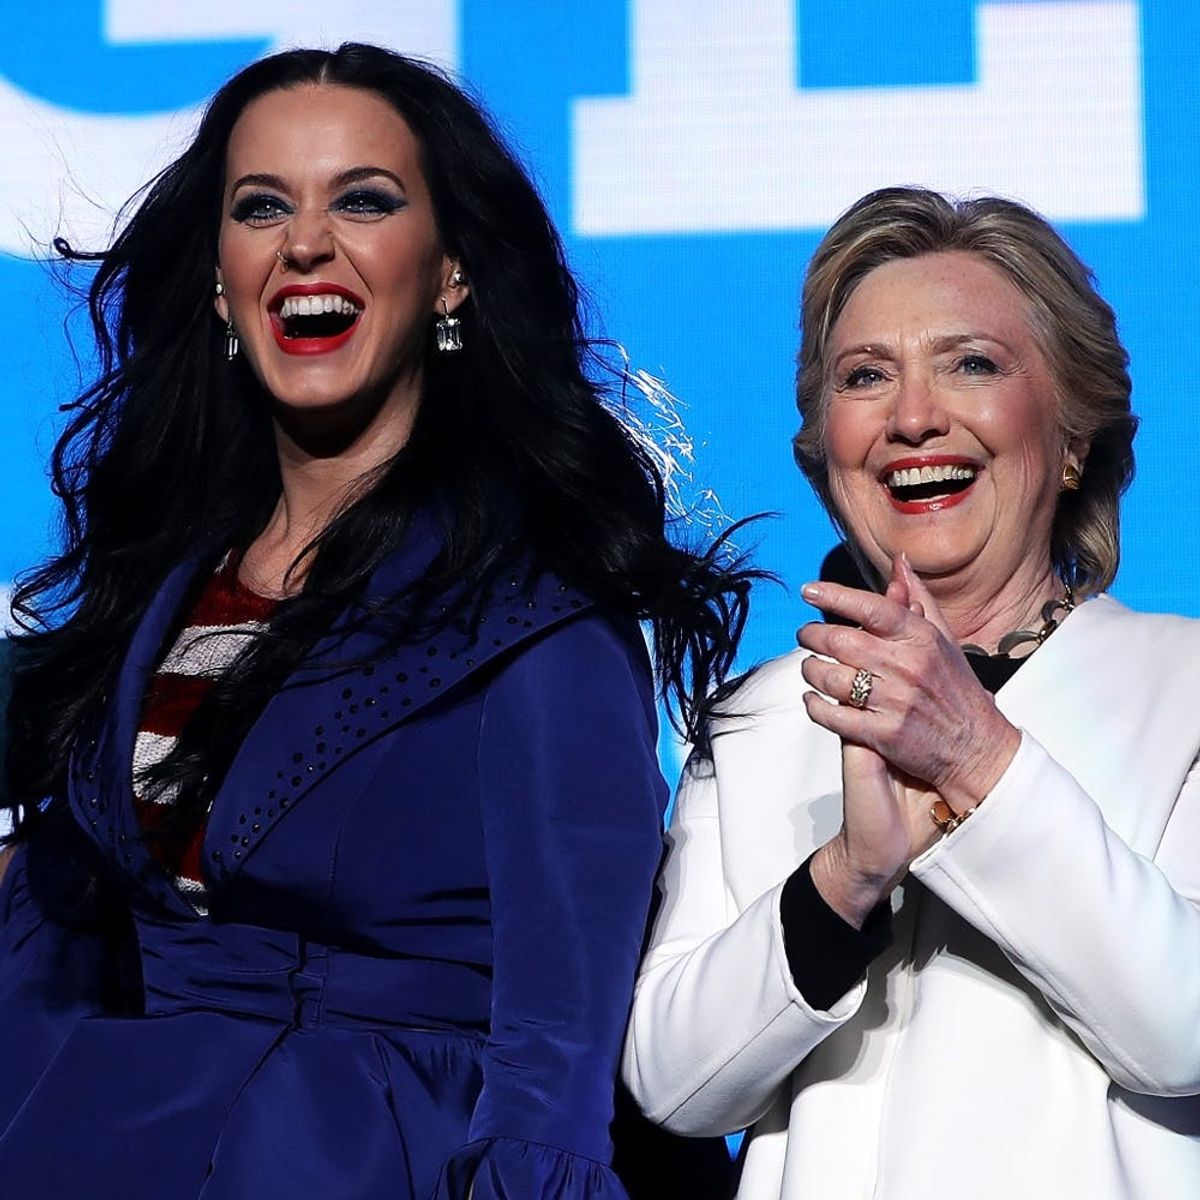 Katy Perry’s Latest Hillary Clinton-Inspired Outfit Just Won the Election